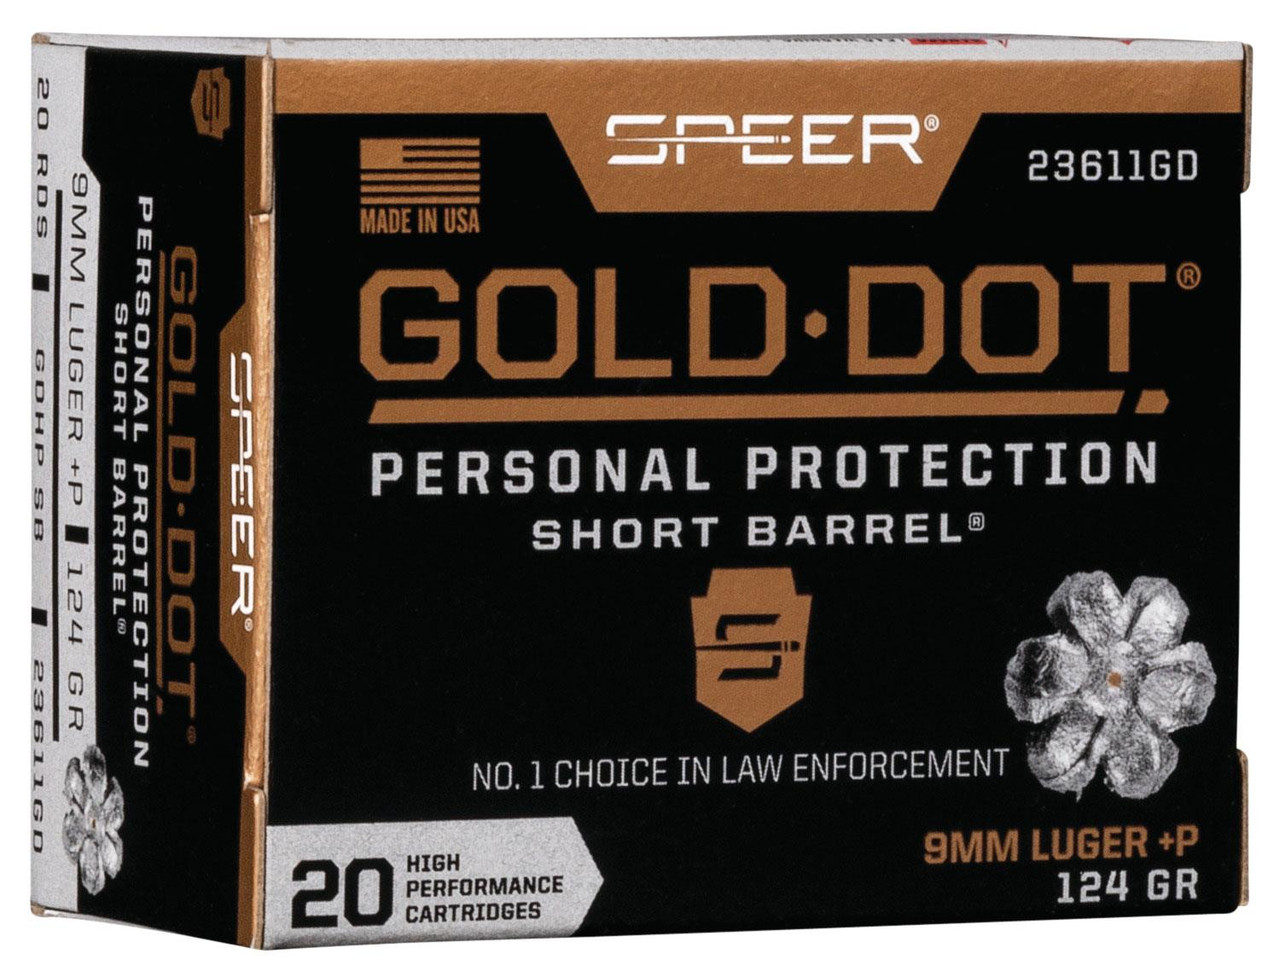 Speer Gold Dot Personal Protection 9mm Luger 23611GD